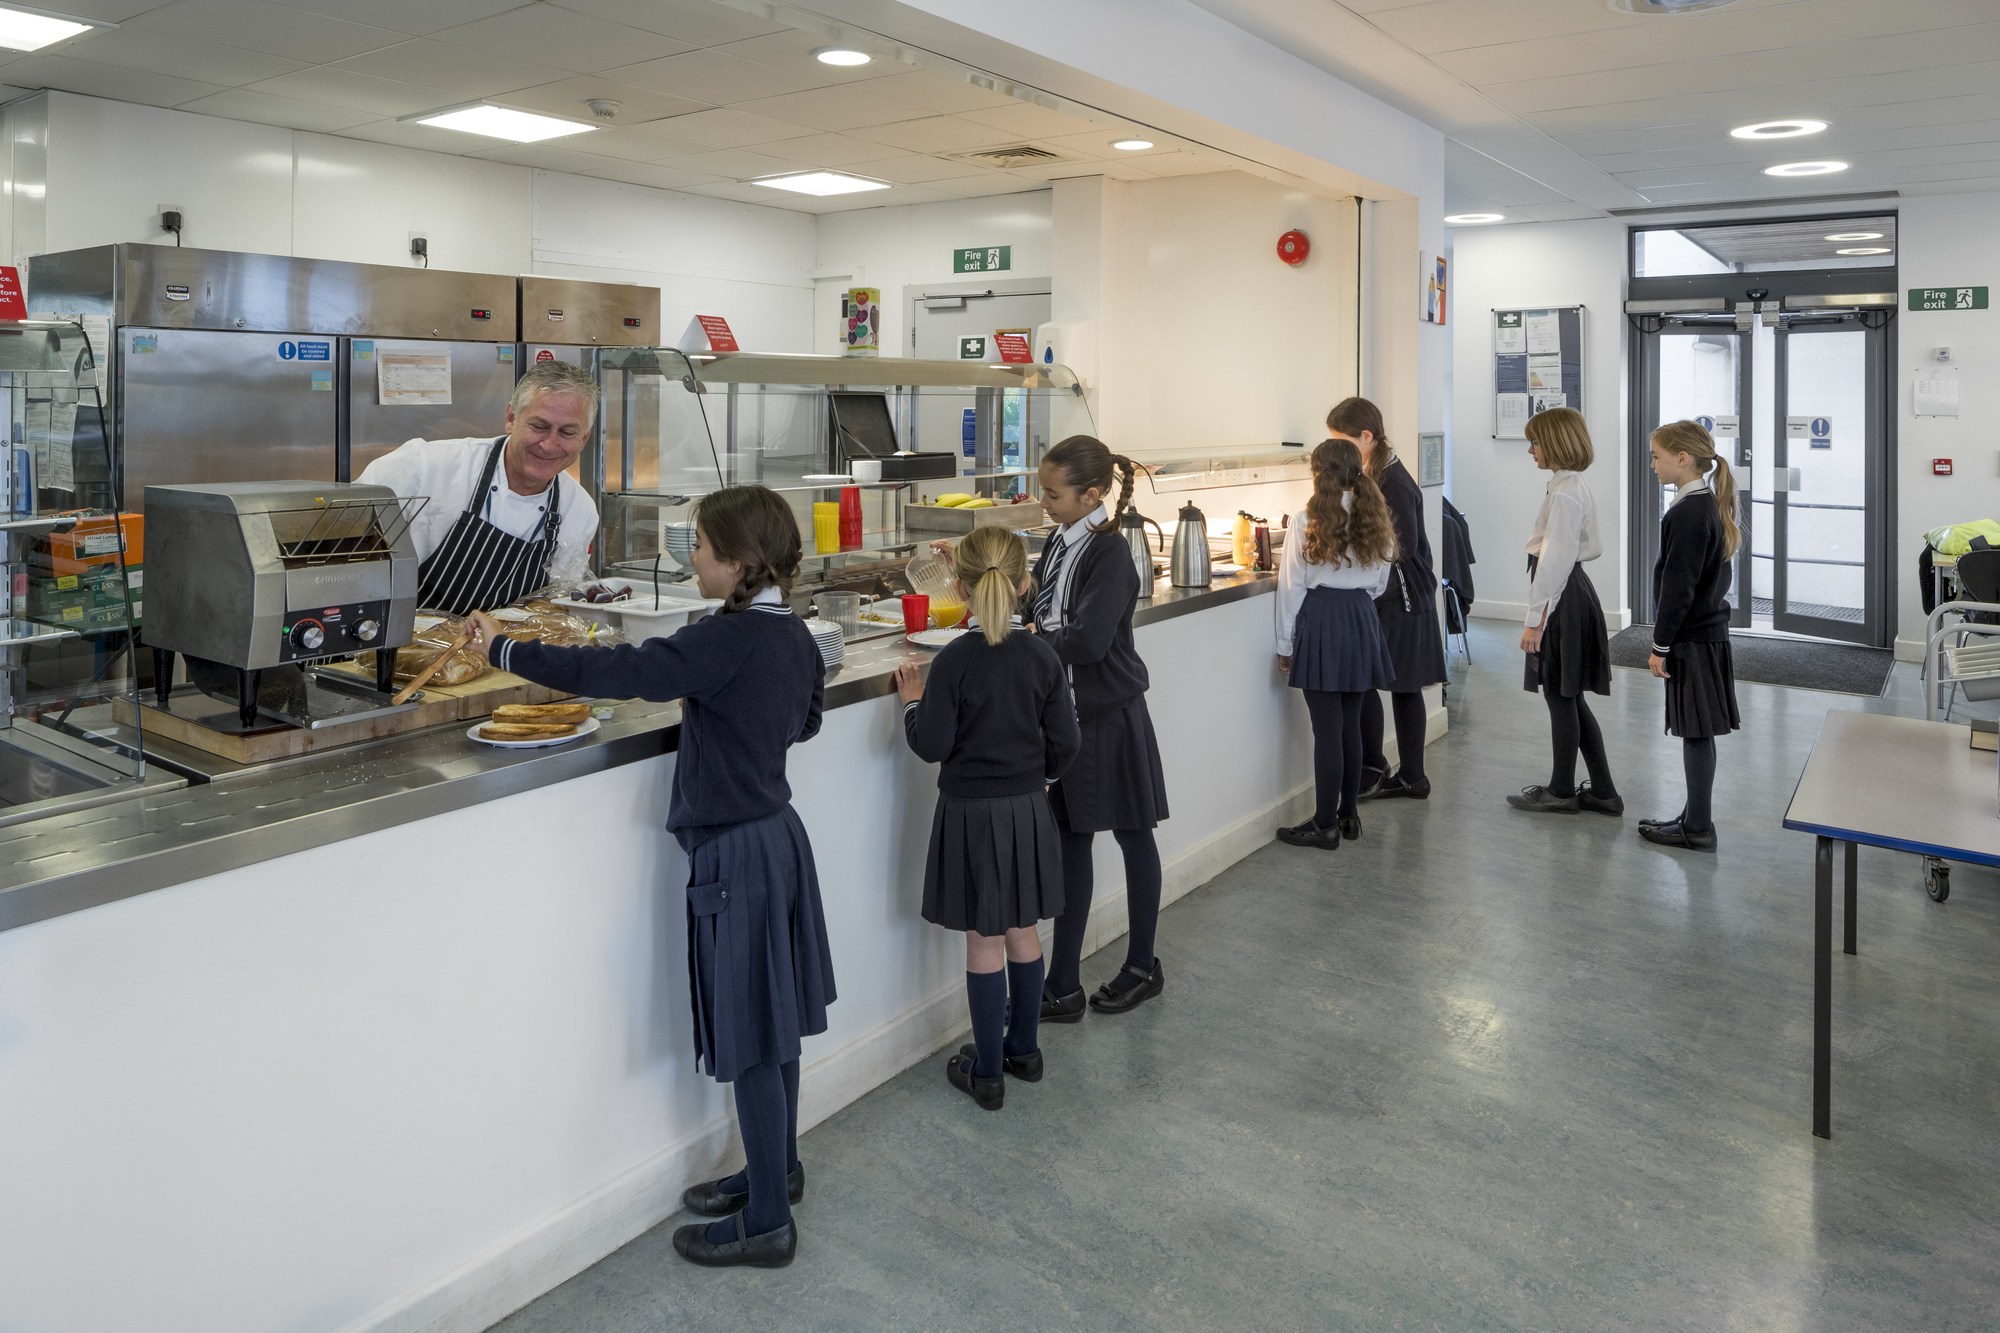 students getting their lunch from the canteen